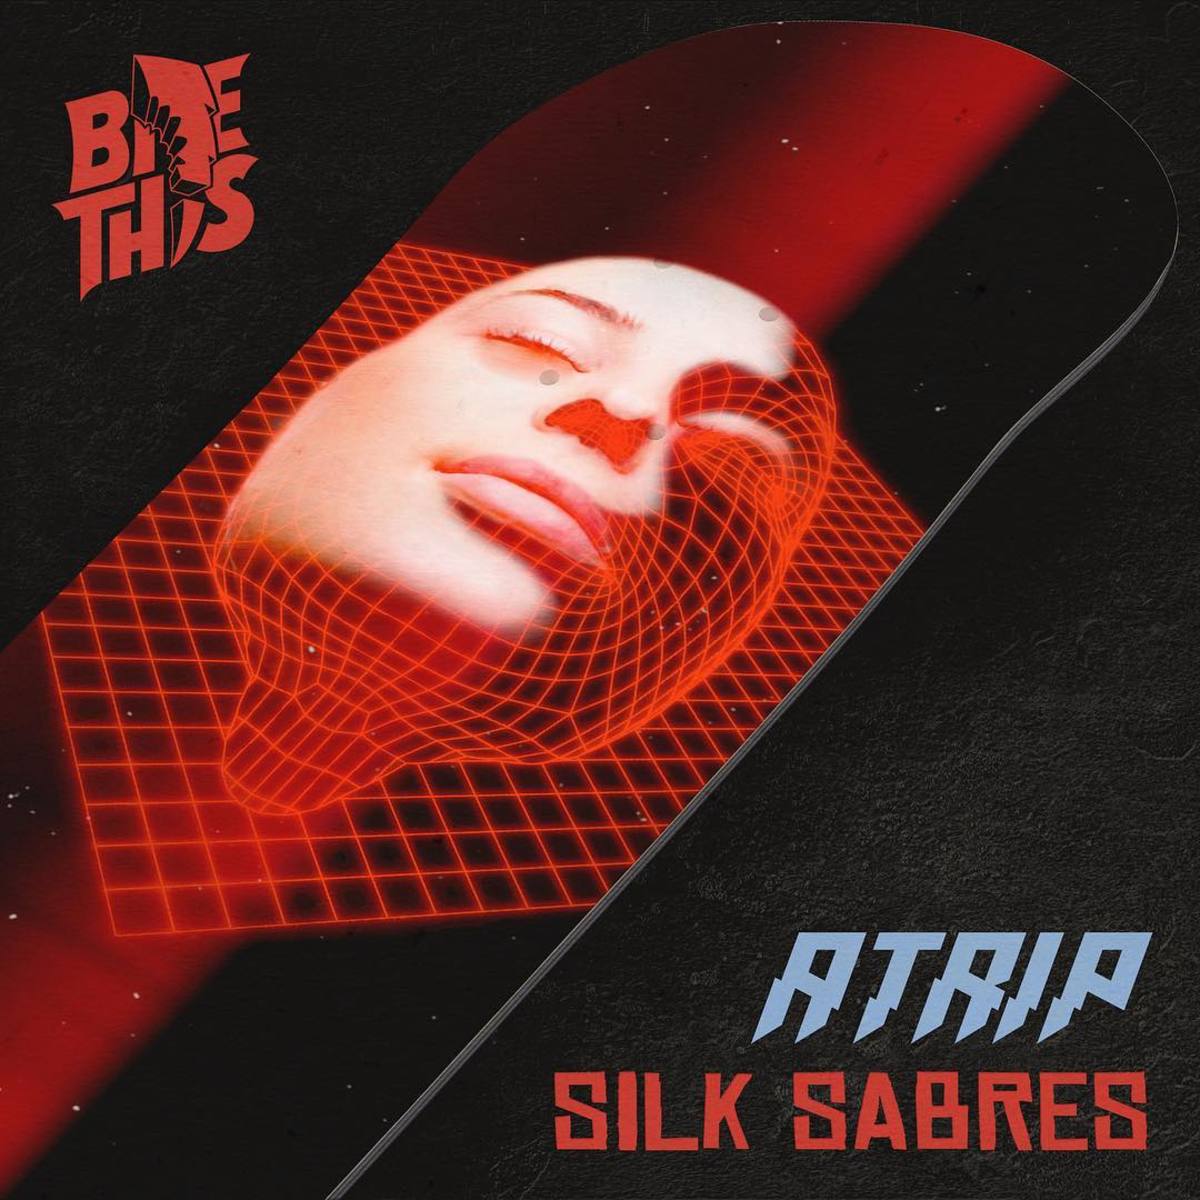 ATRIP - Silk Sabres EP release on BITE THIS! (EDM.com Feature)